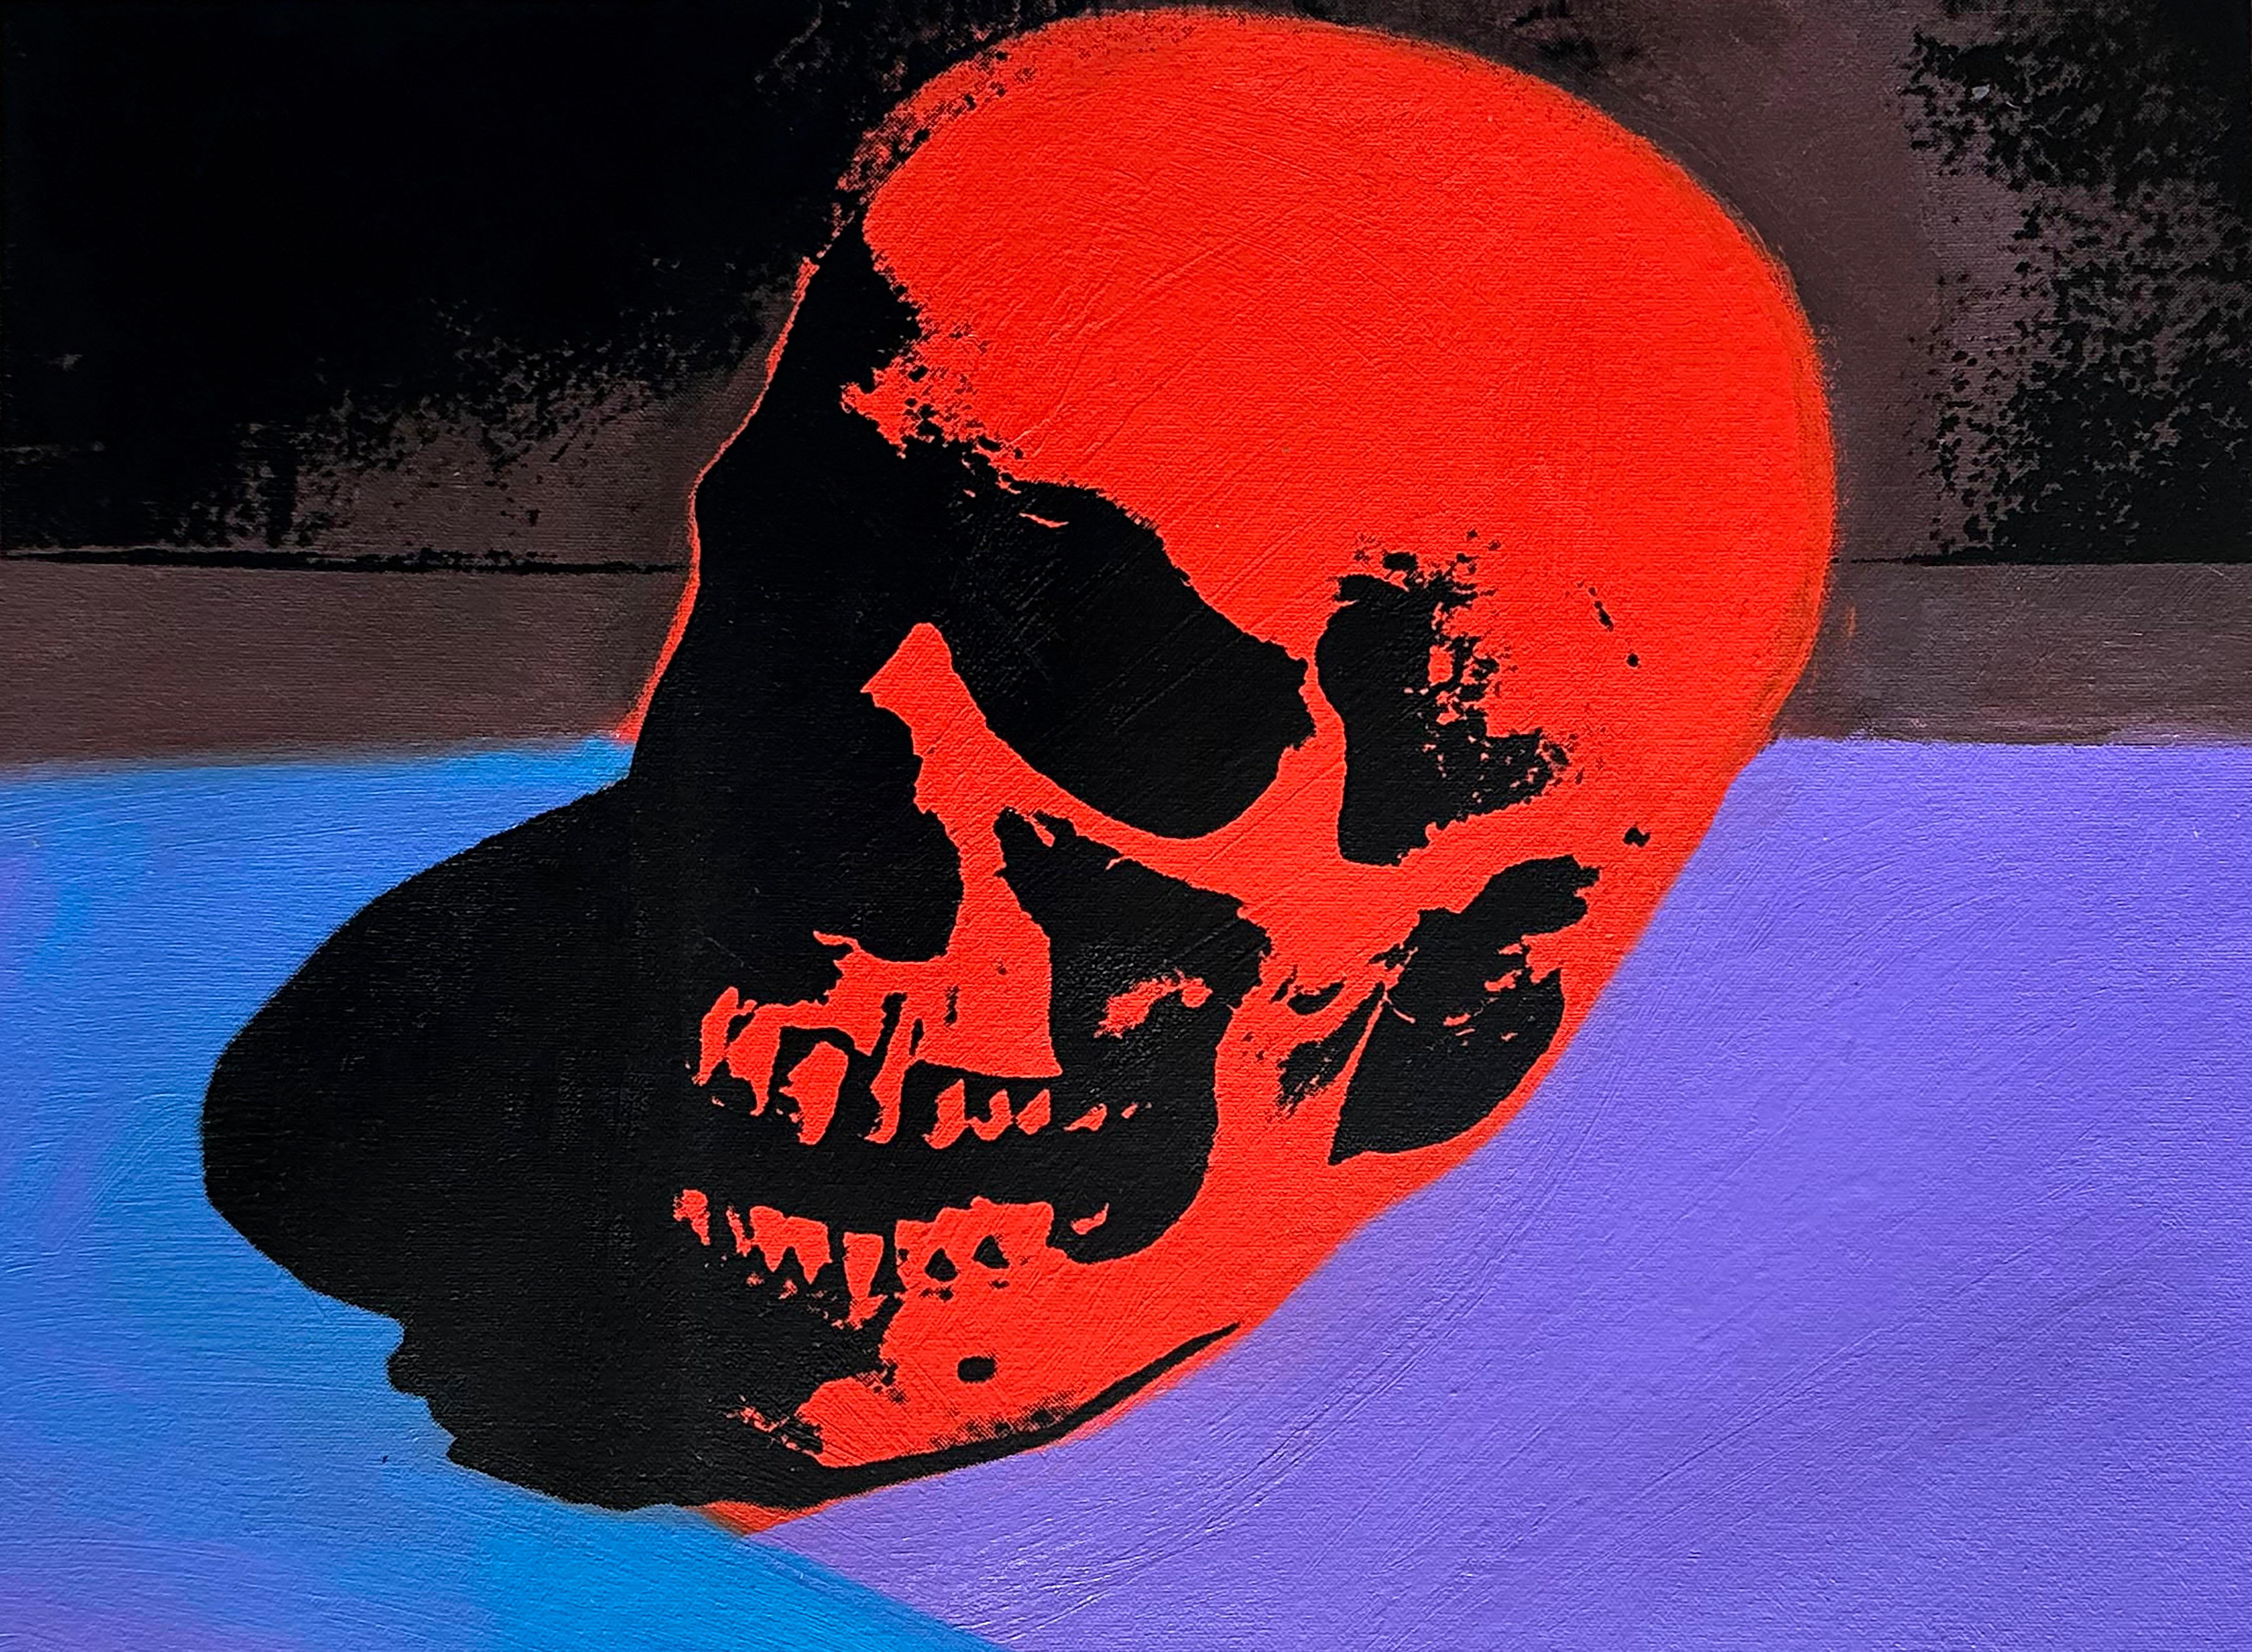 Denied Warhol Red Skull Painting by Charles Lutz
Silkscreen and acrylic on linen with Denied stamp of the Andy Warhol Art Authentication Board.
11 x 15